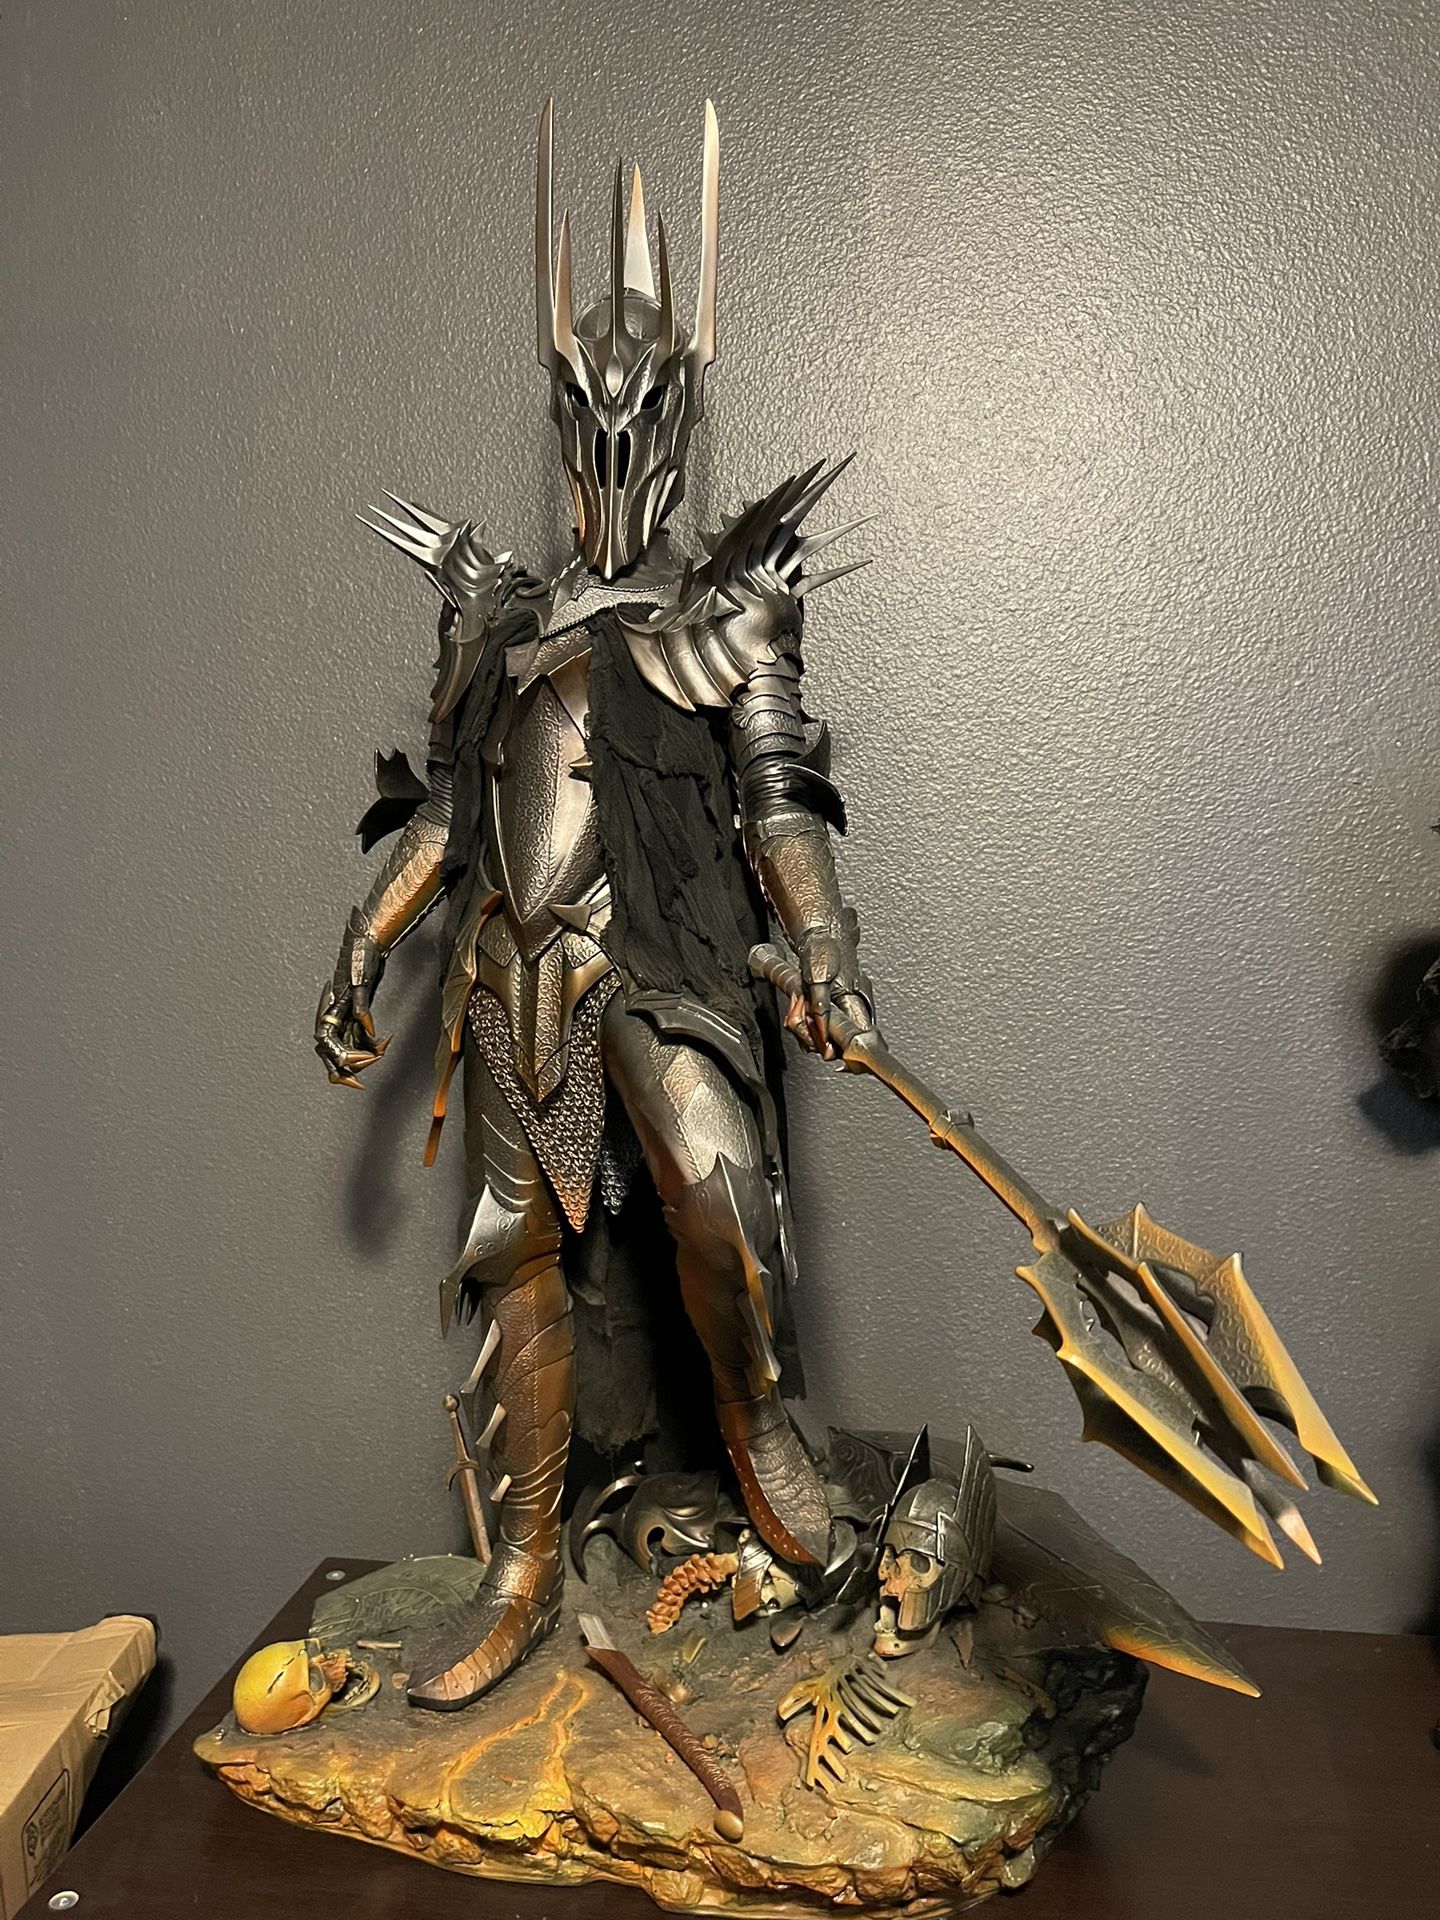 Sideshow Sauron Statue - Lord of The Rings